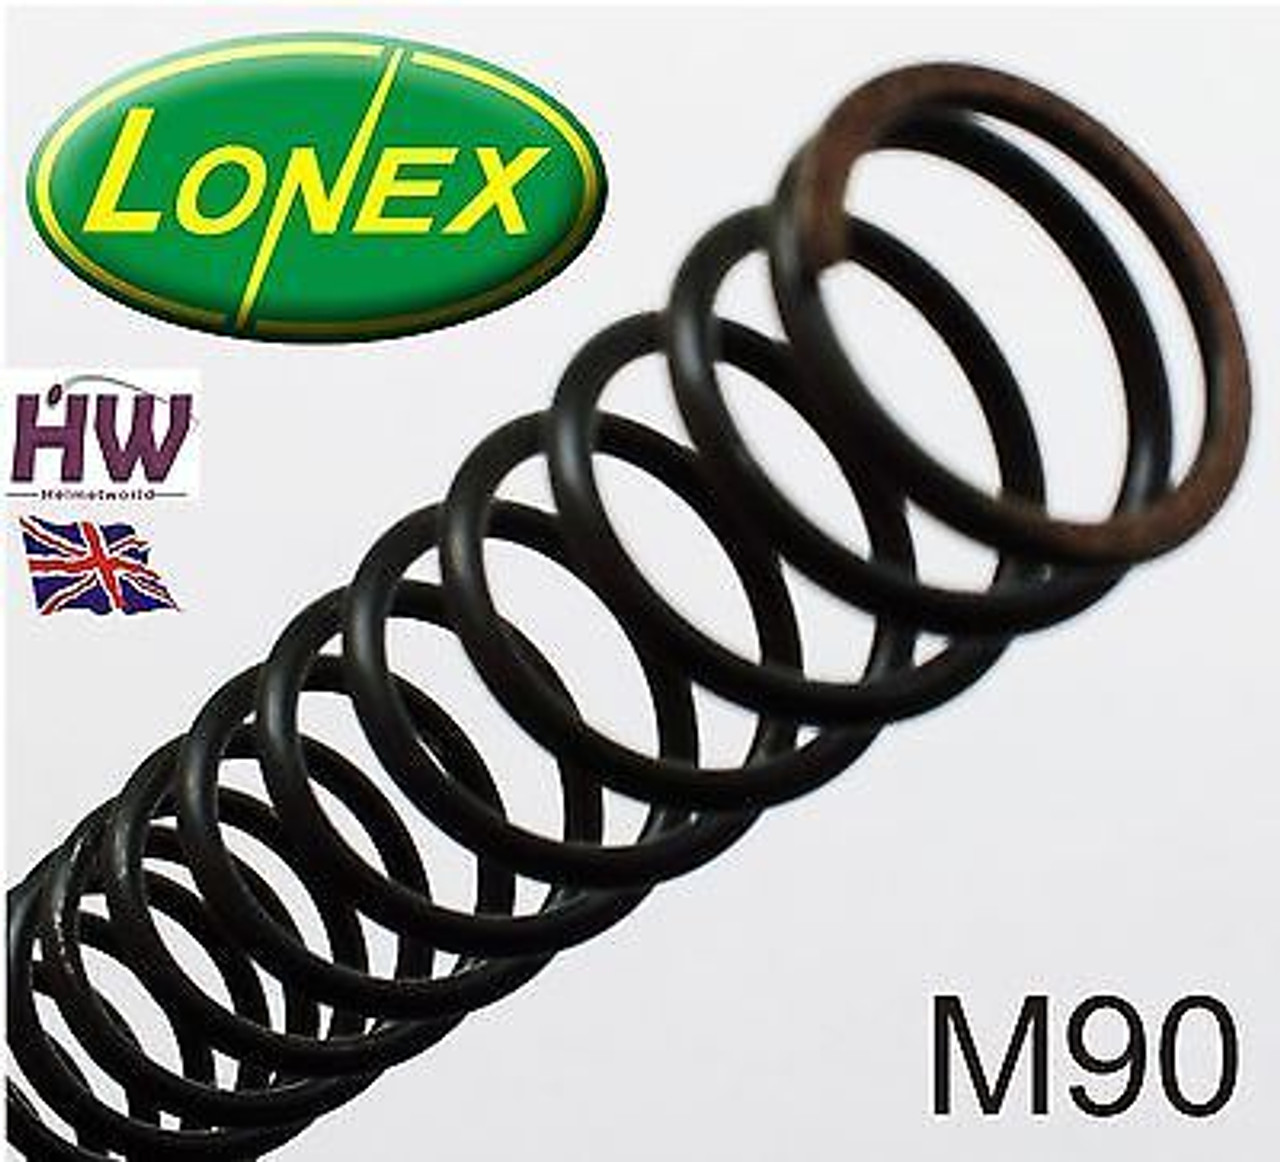 M90 AIRSOFT SPRING LONEX ULTIMATE QUALITY STEEL ASG NONLINEAR